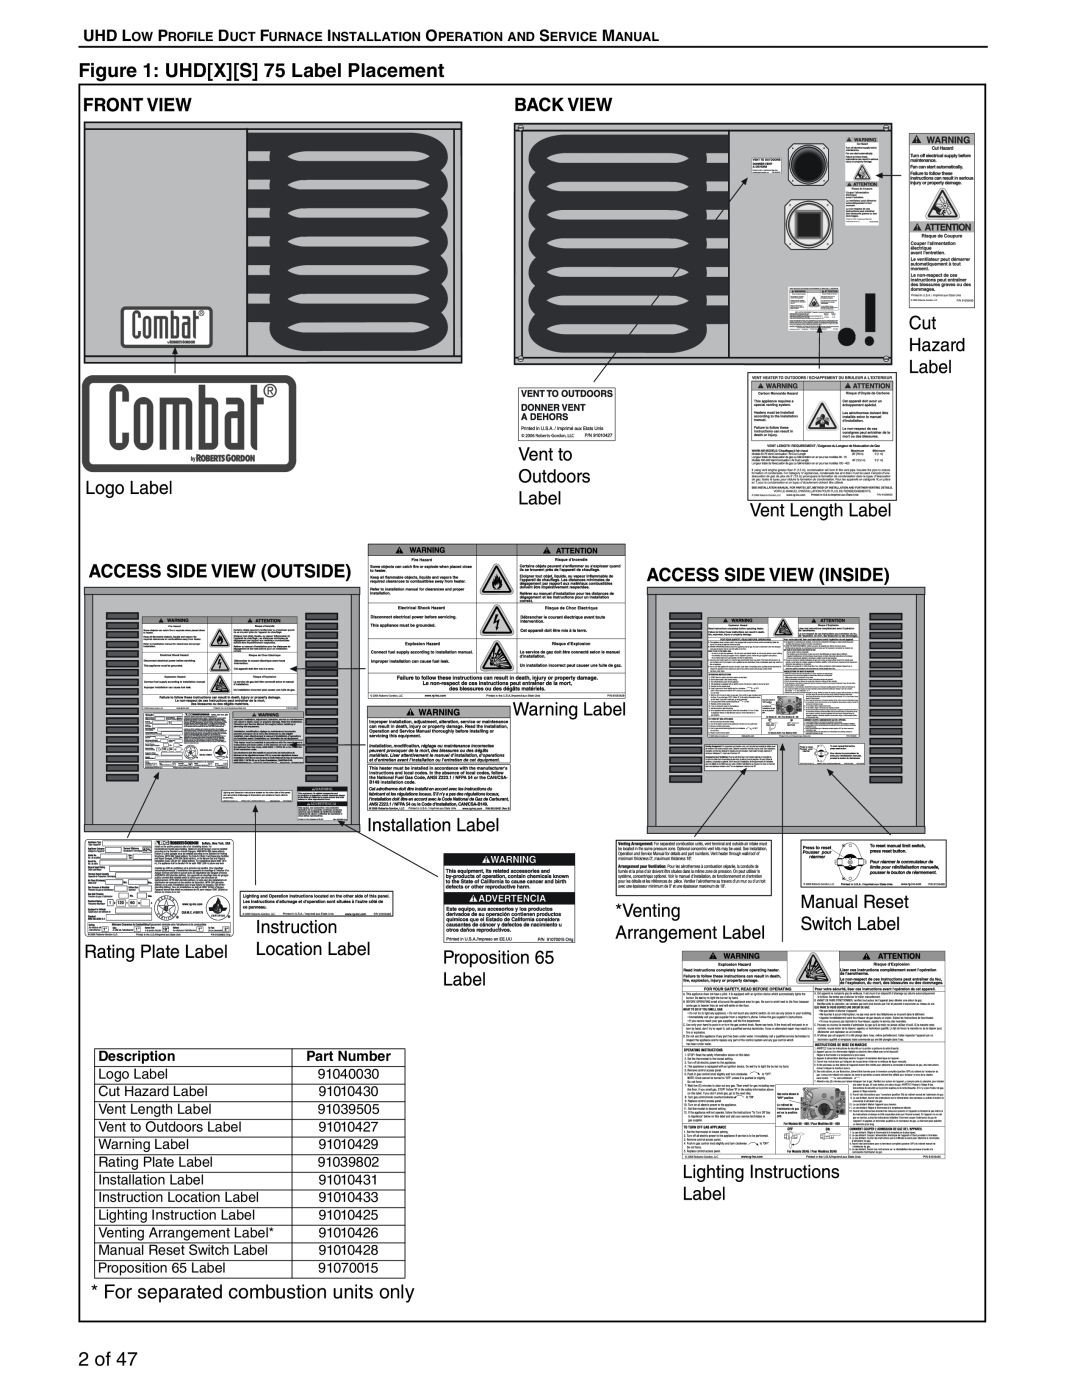 Roberts Gorden 100, 125 service manual UHDXS 75 Label Placement, For separated combustion units only, 2 of 